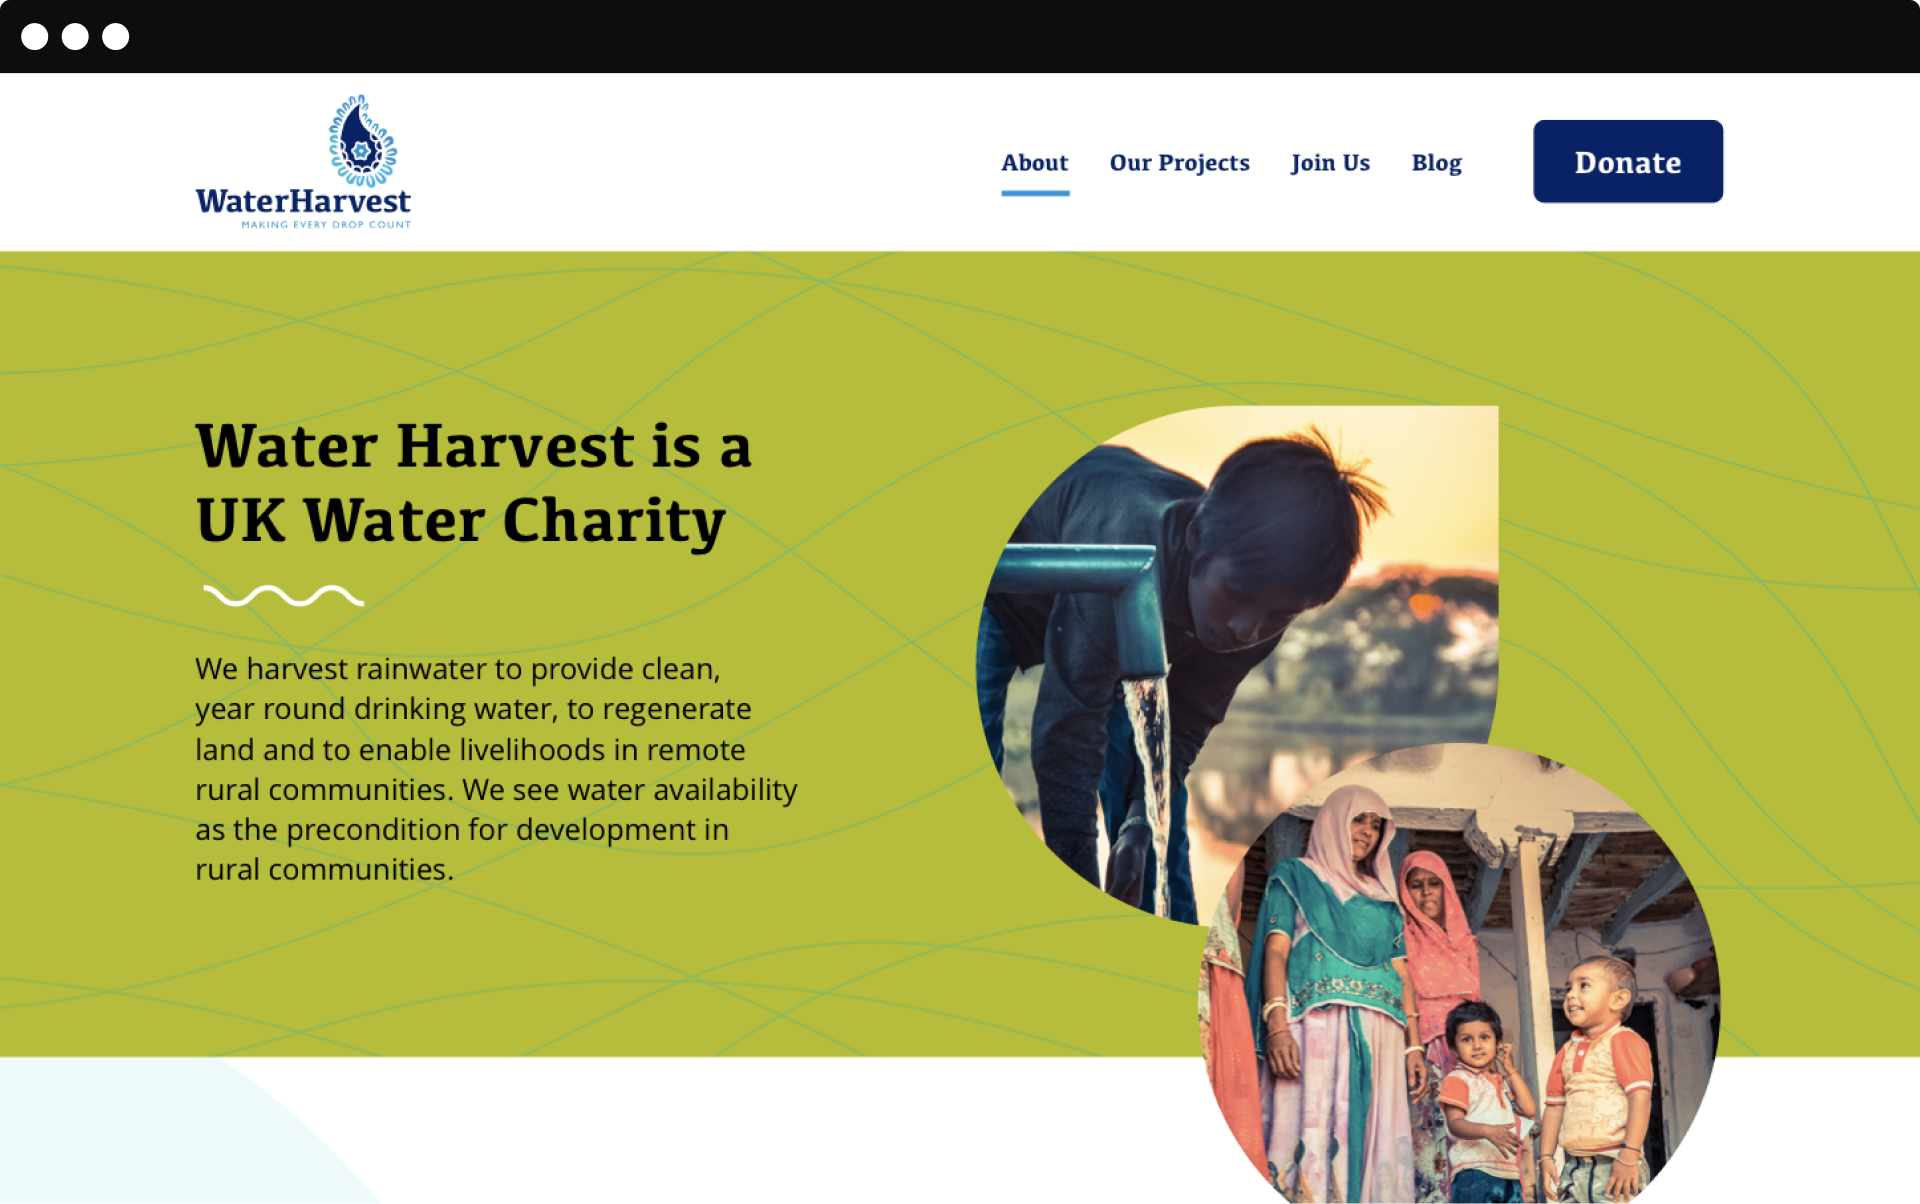 Water Harvest About Page